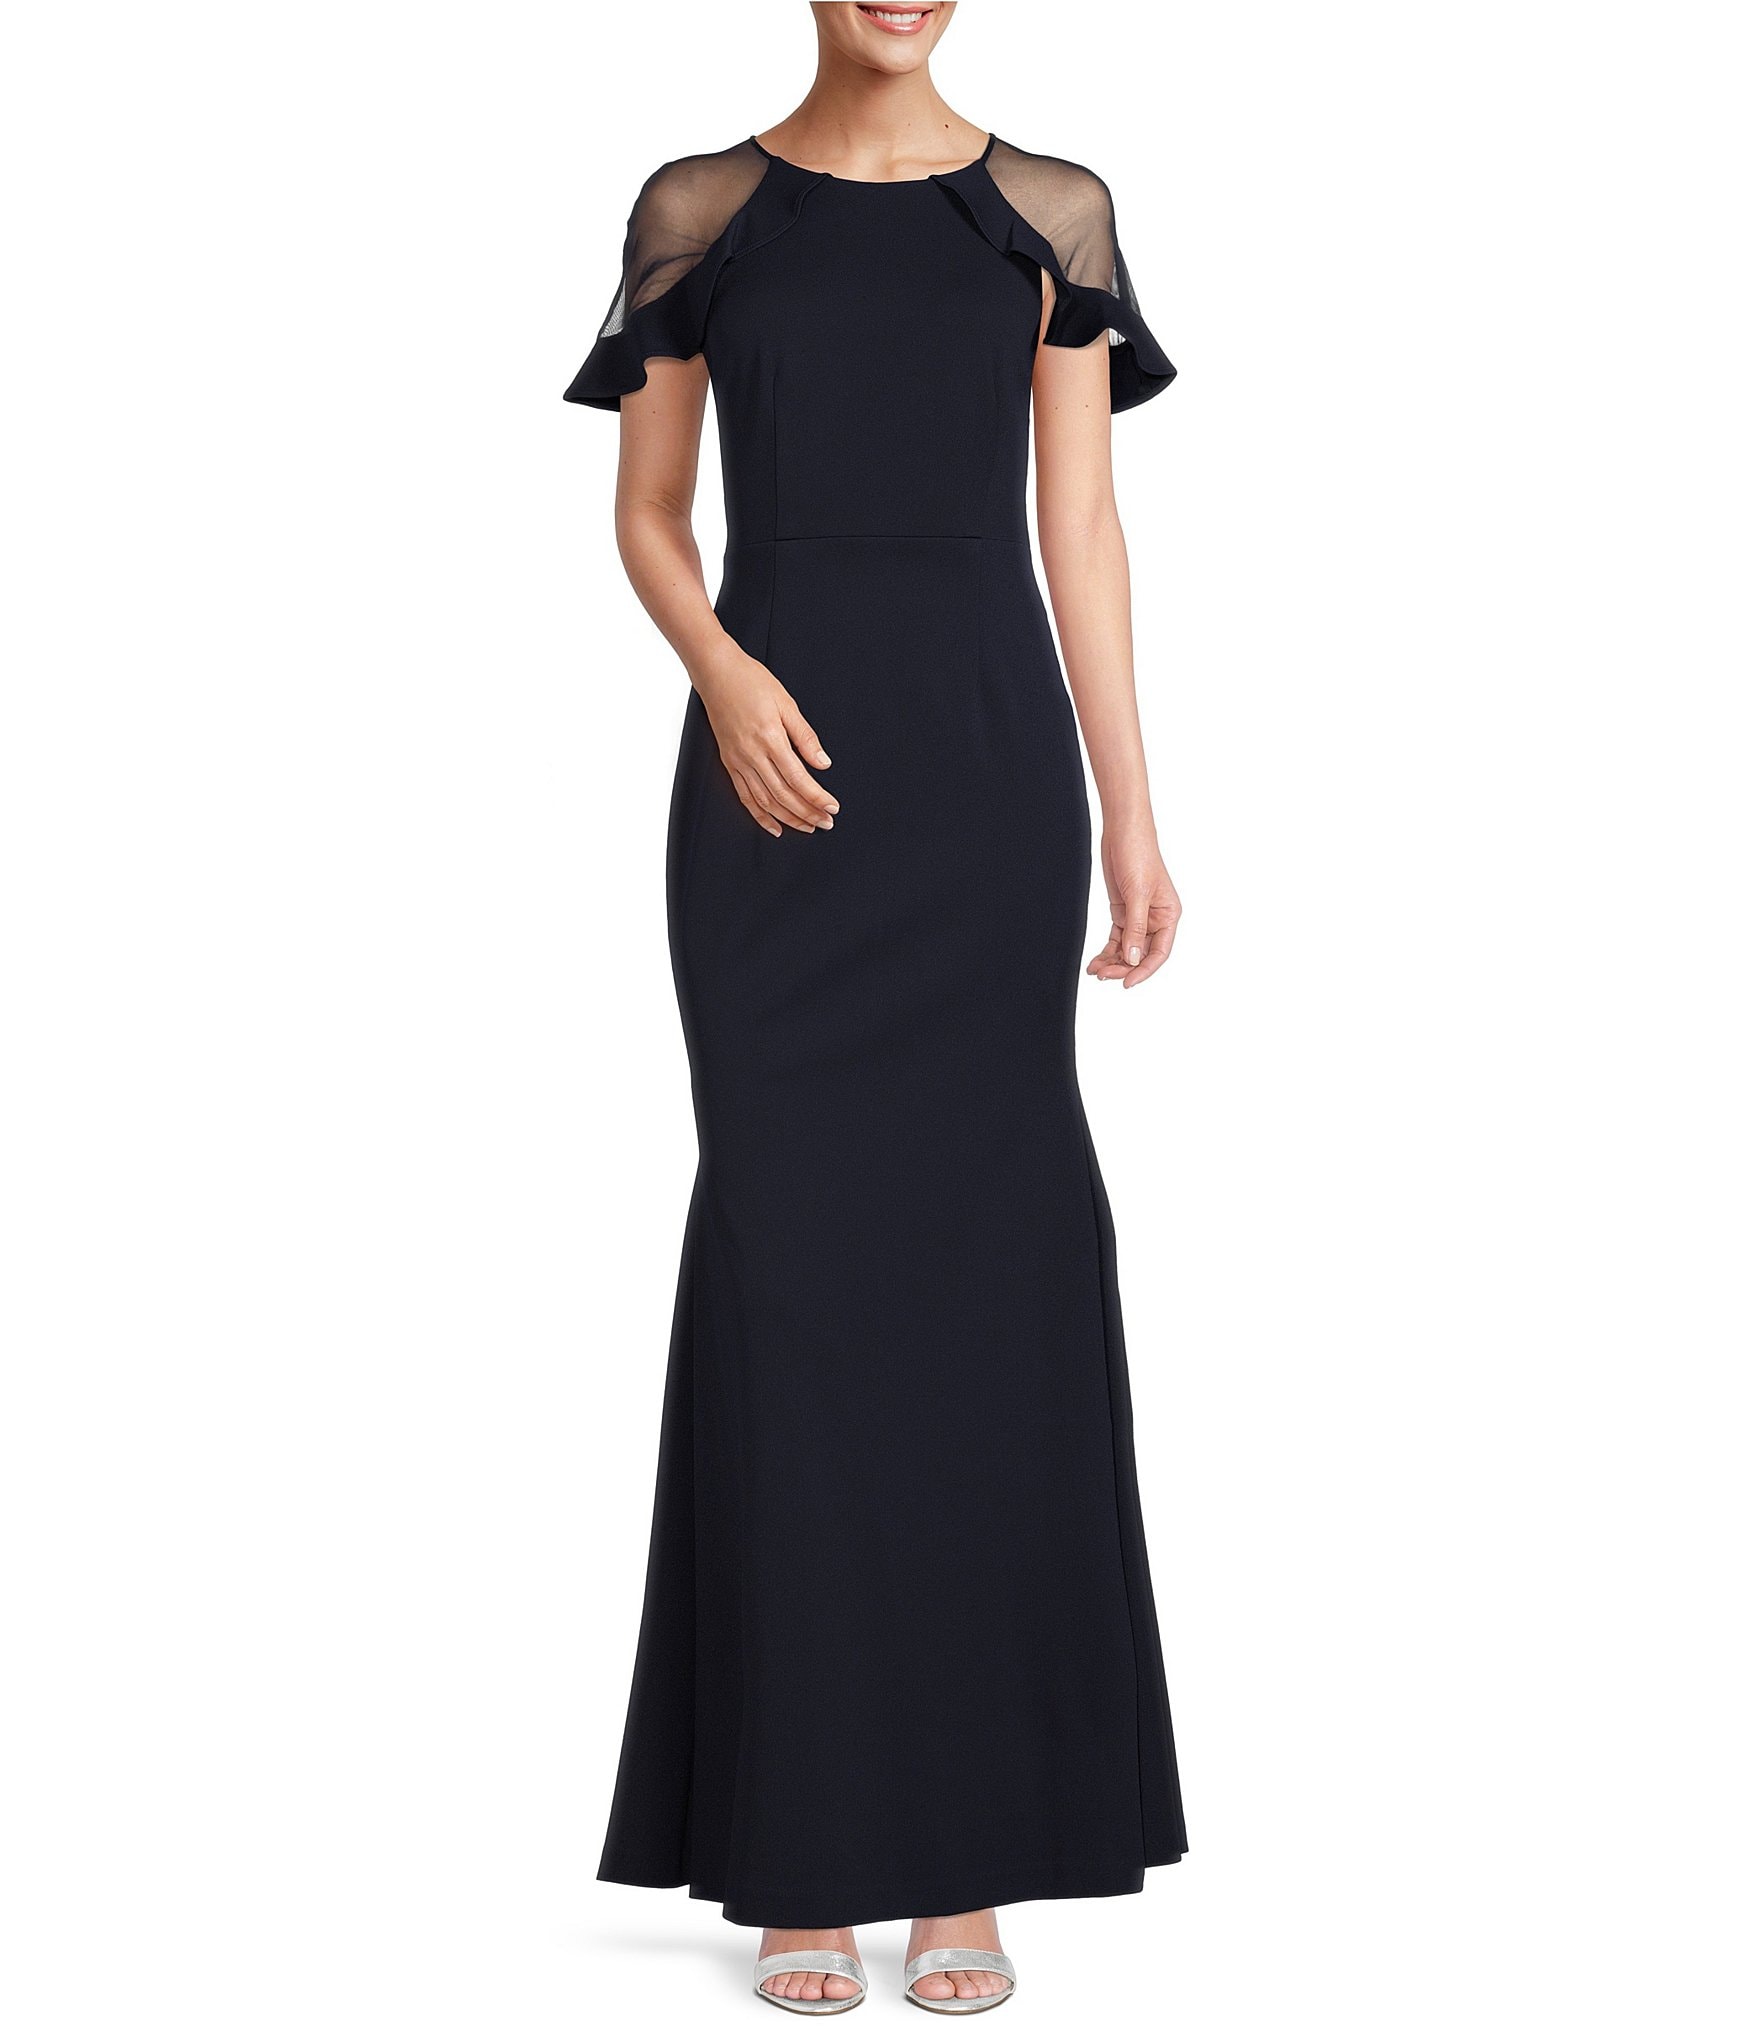 embroidery: Women's Formal Dresses & Evening Gowns | Dillard's